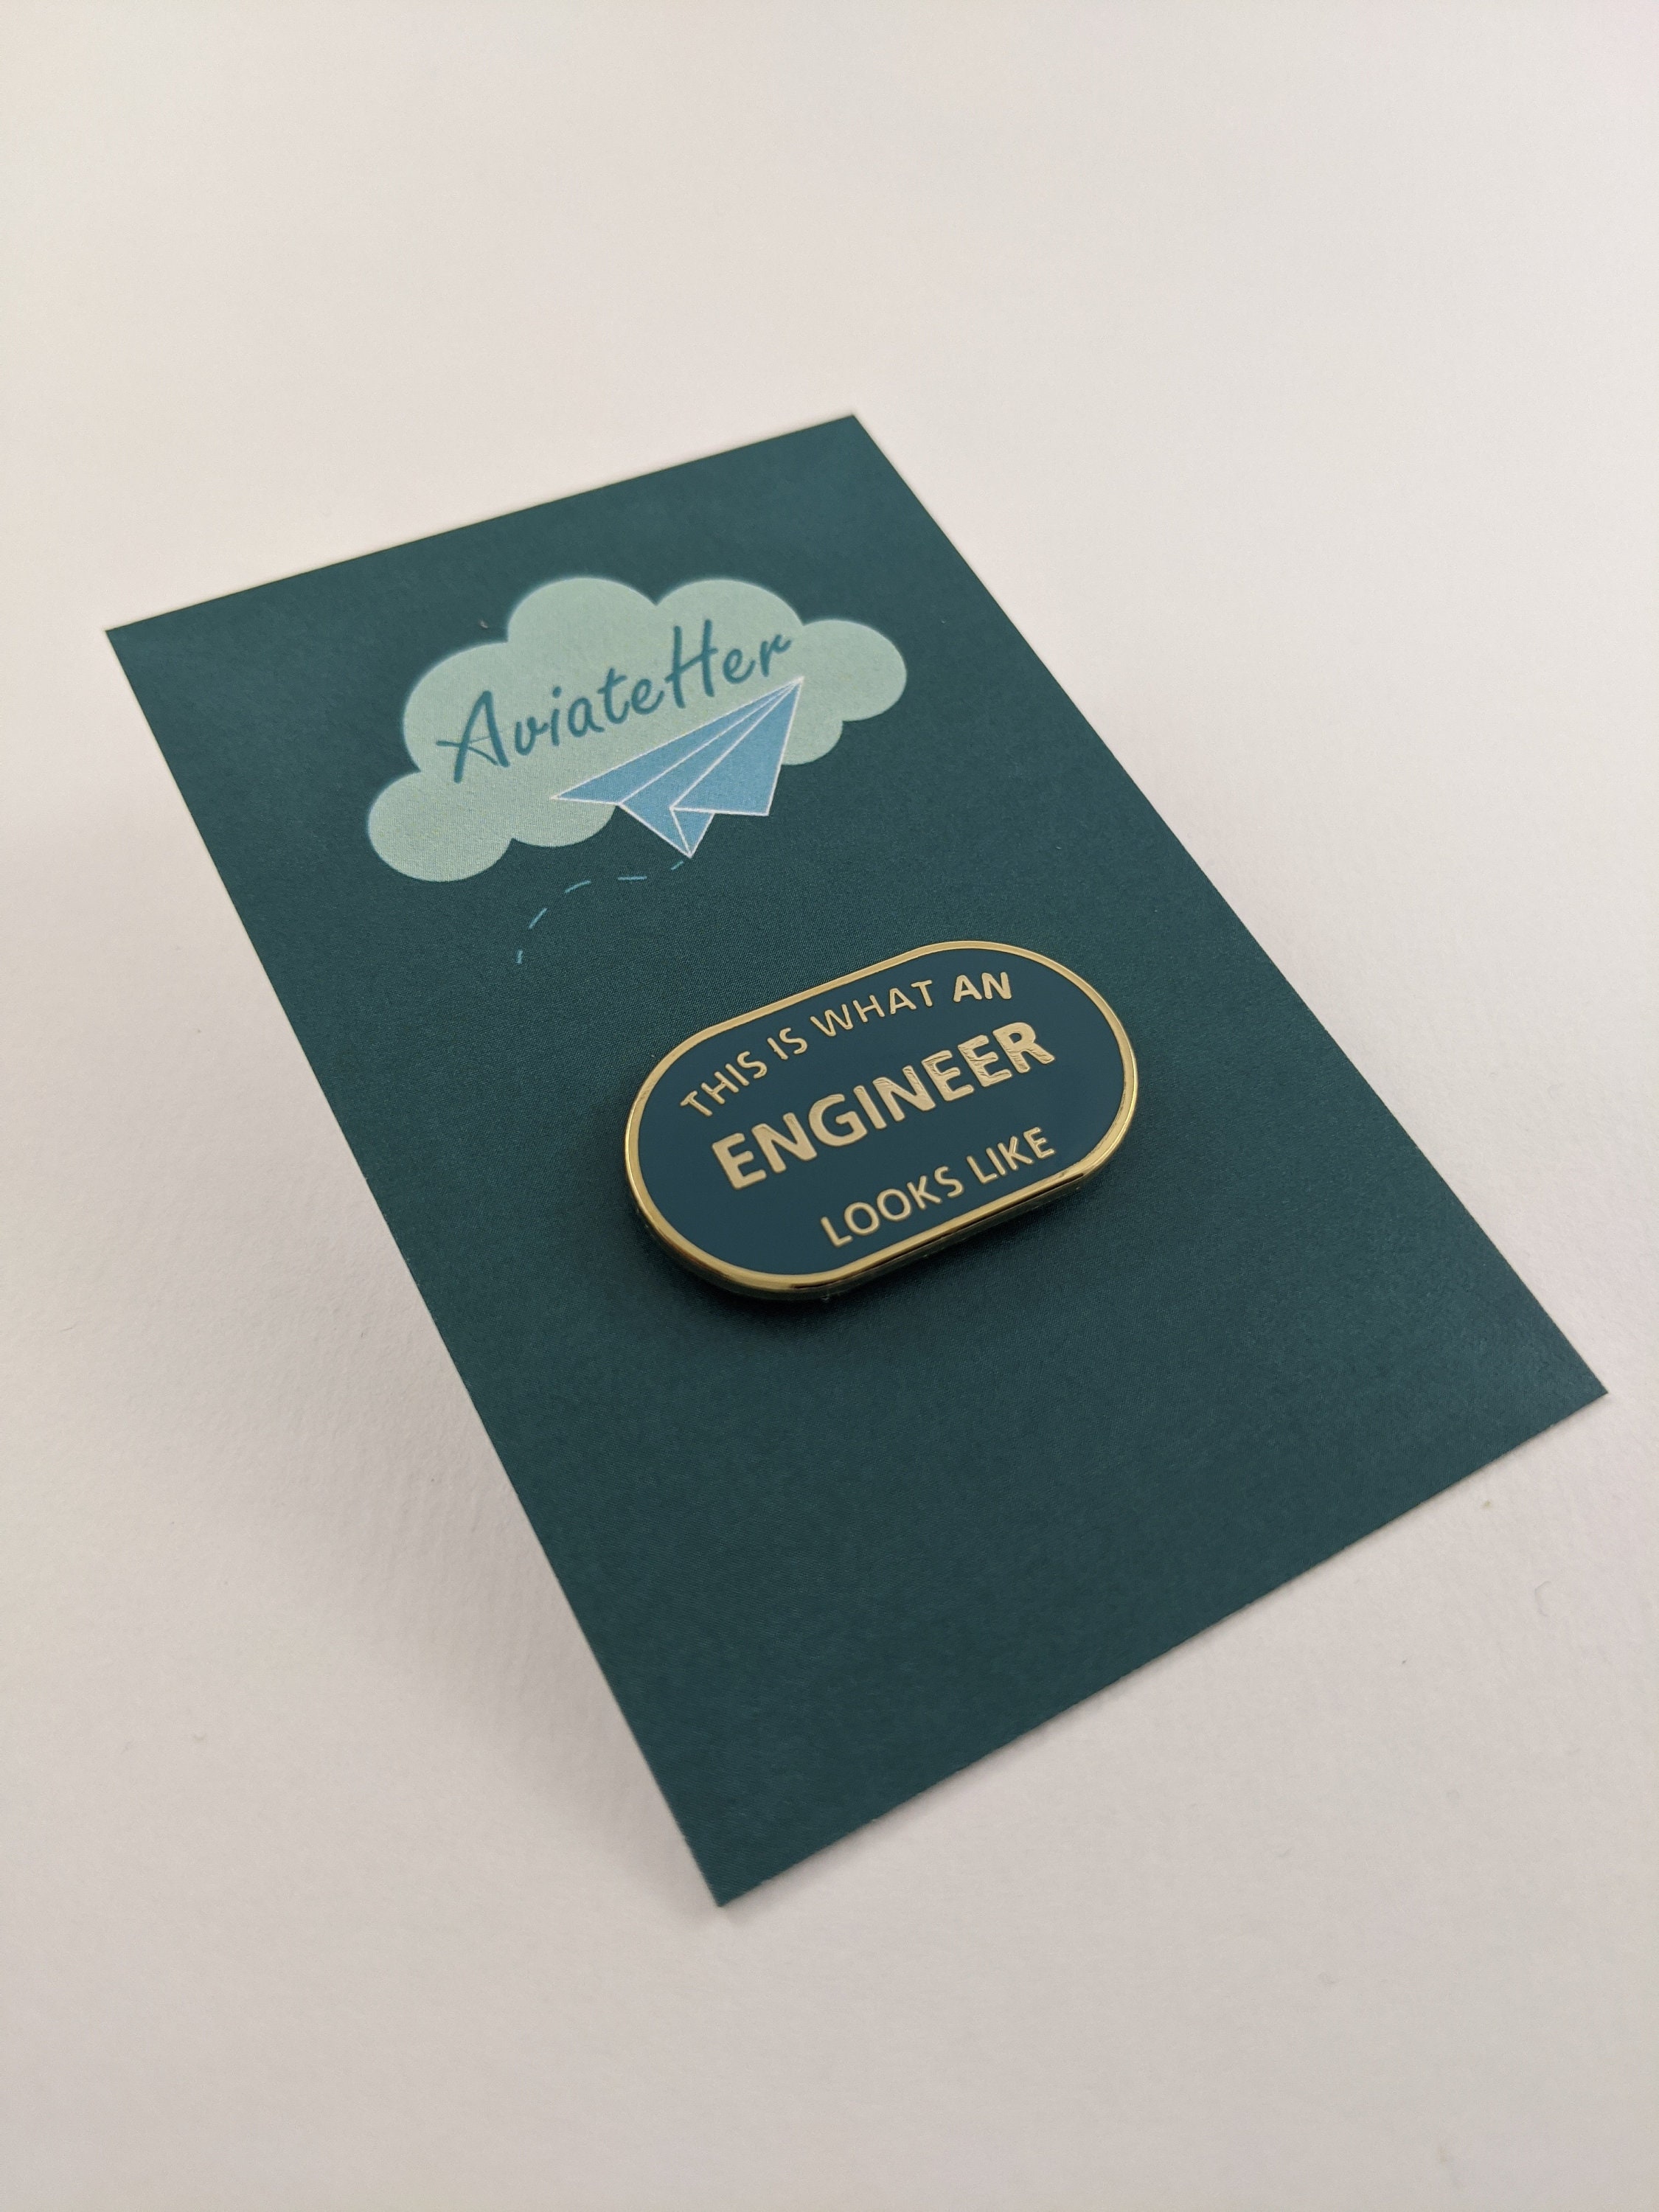 20. "This is What an Engineer Looks Like" Pin Badge